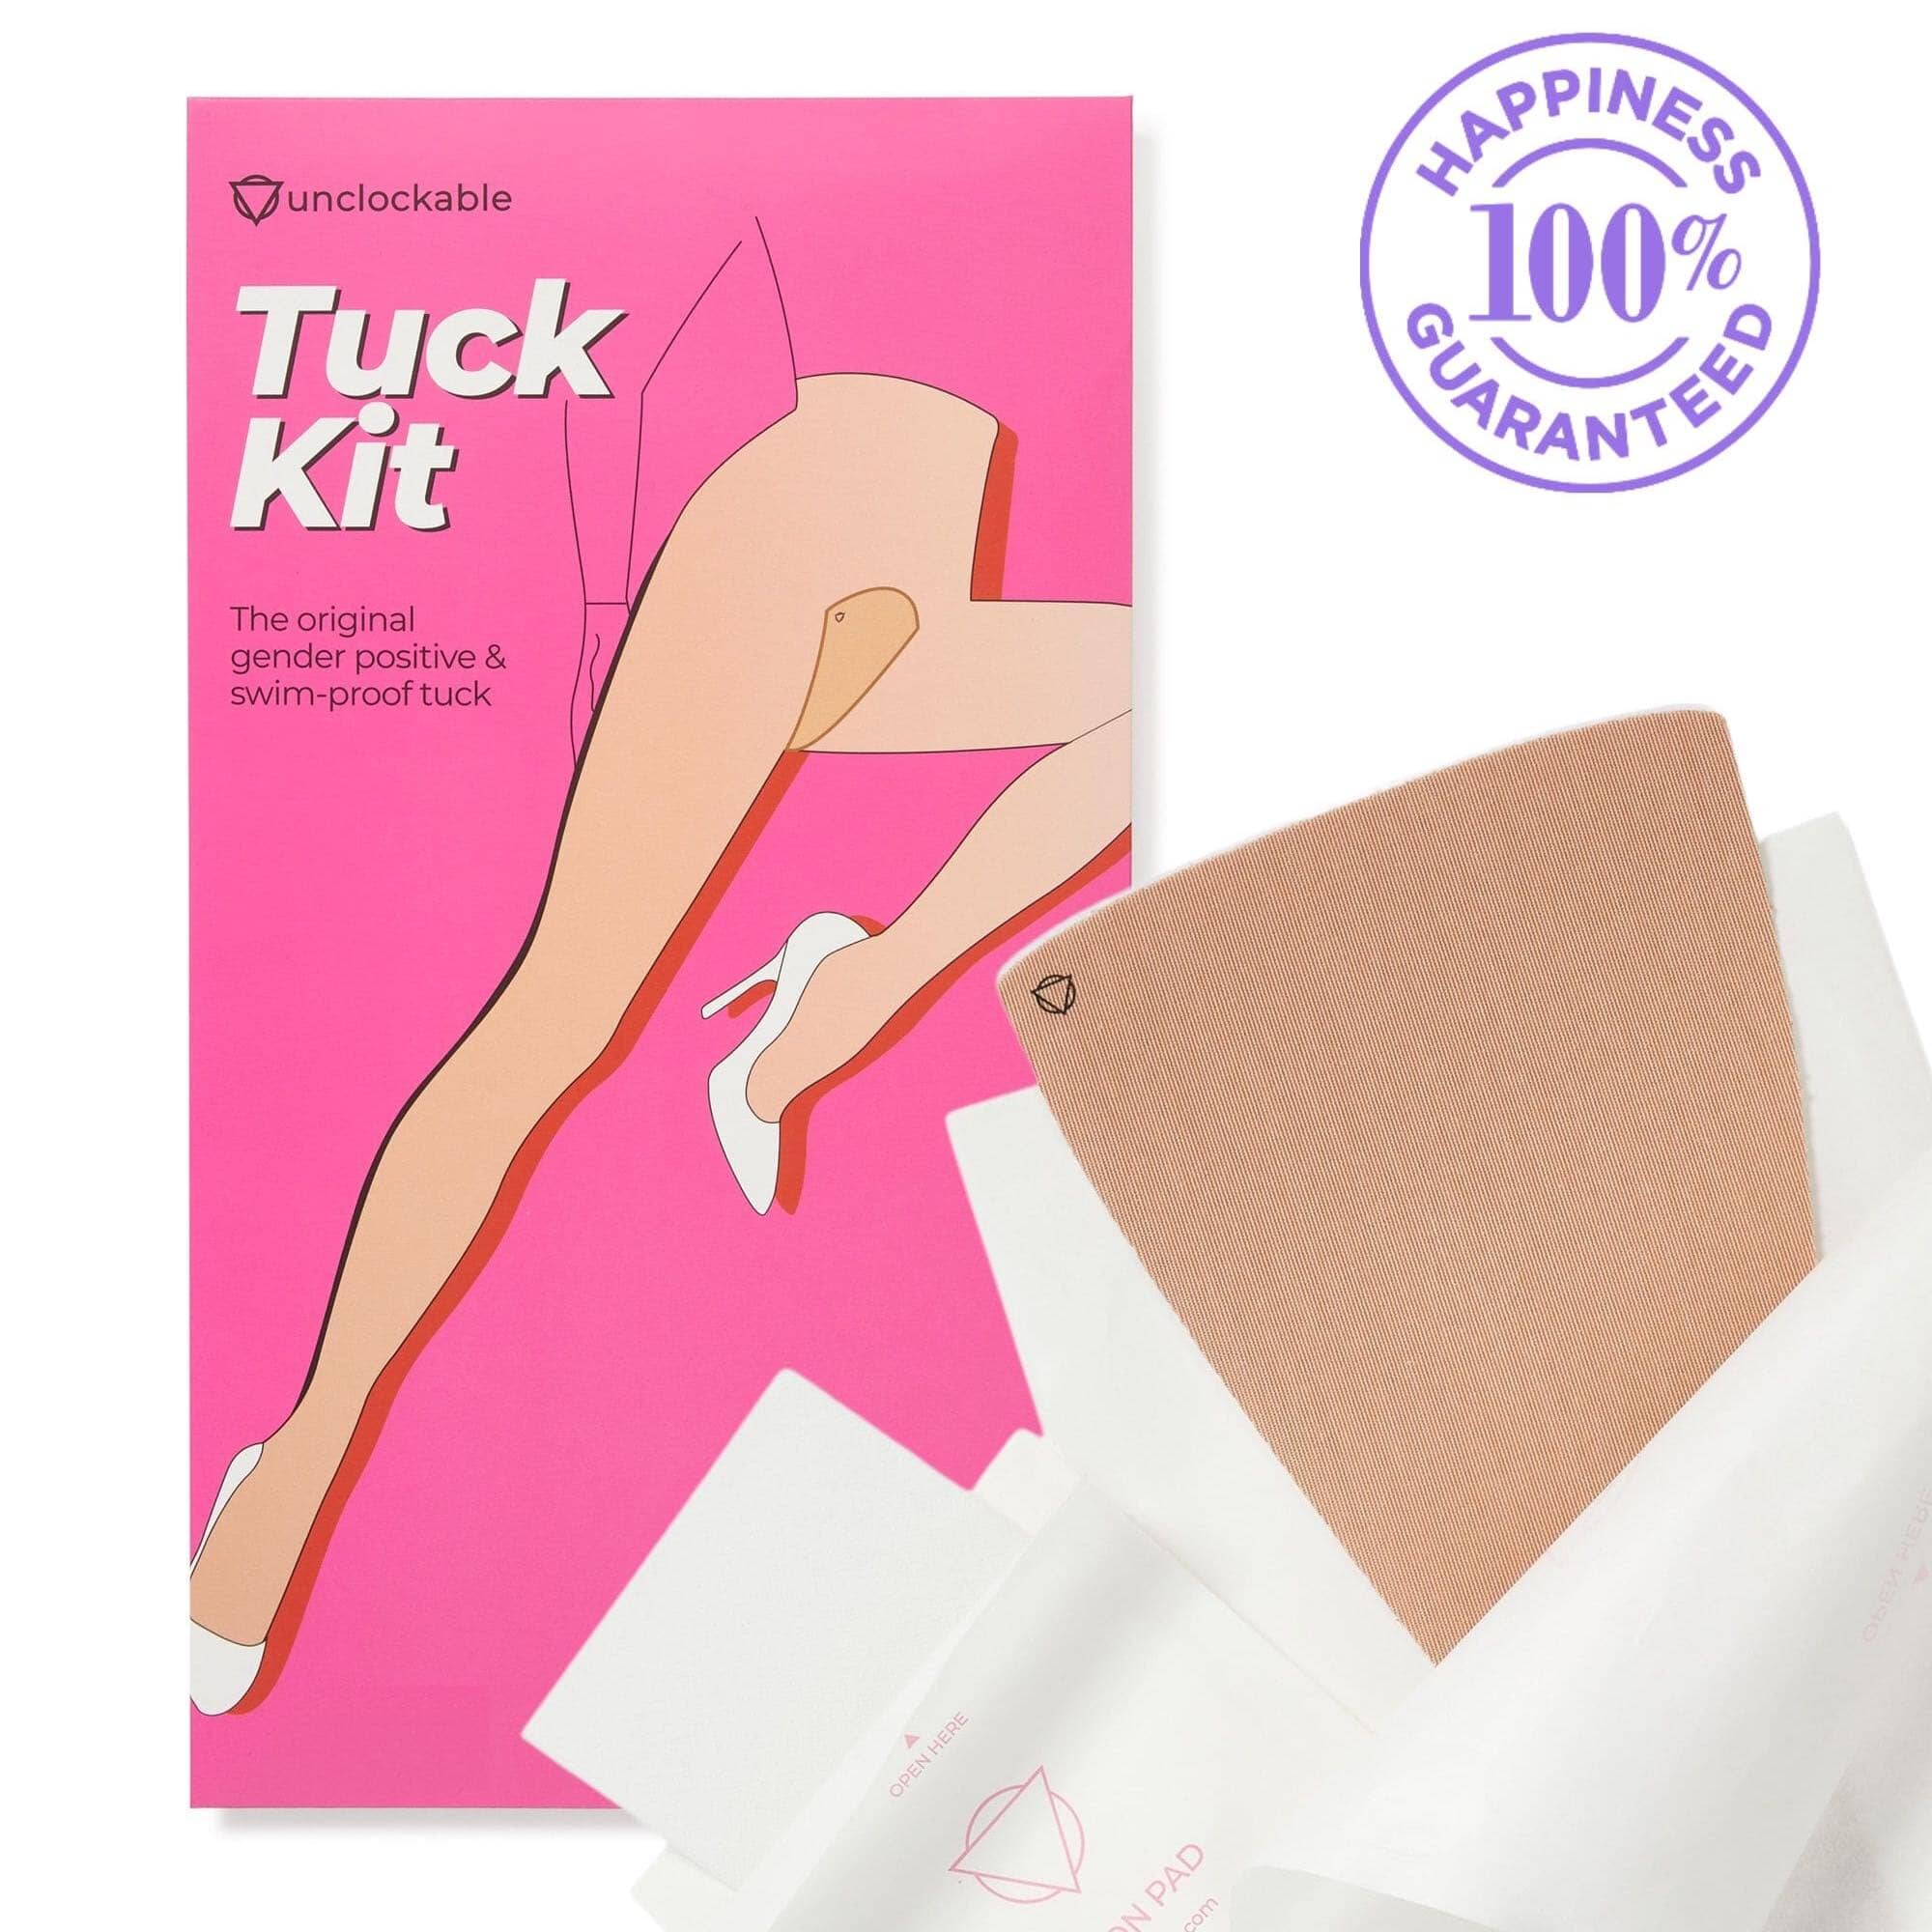 Tucking, made easy. Tuck it. Slip it. You're done.